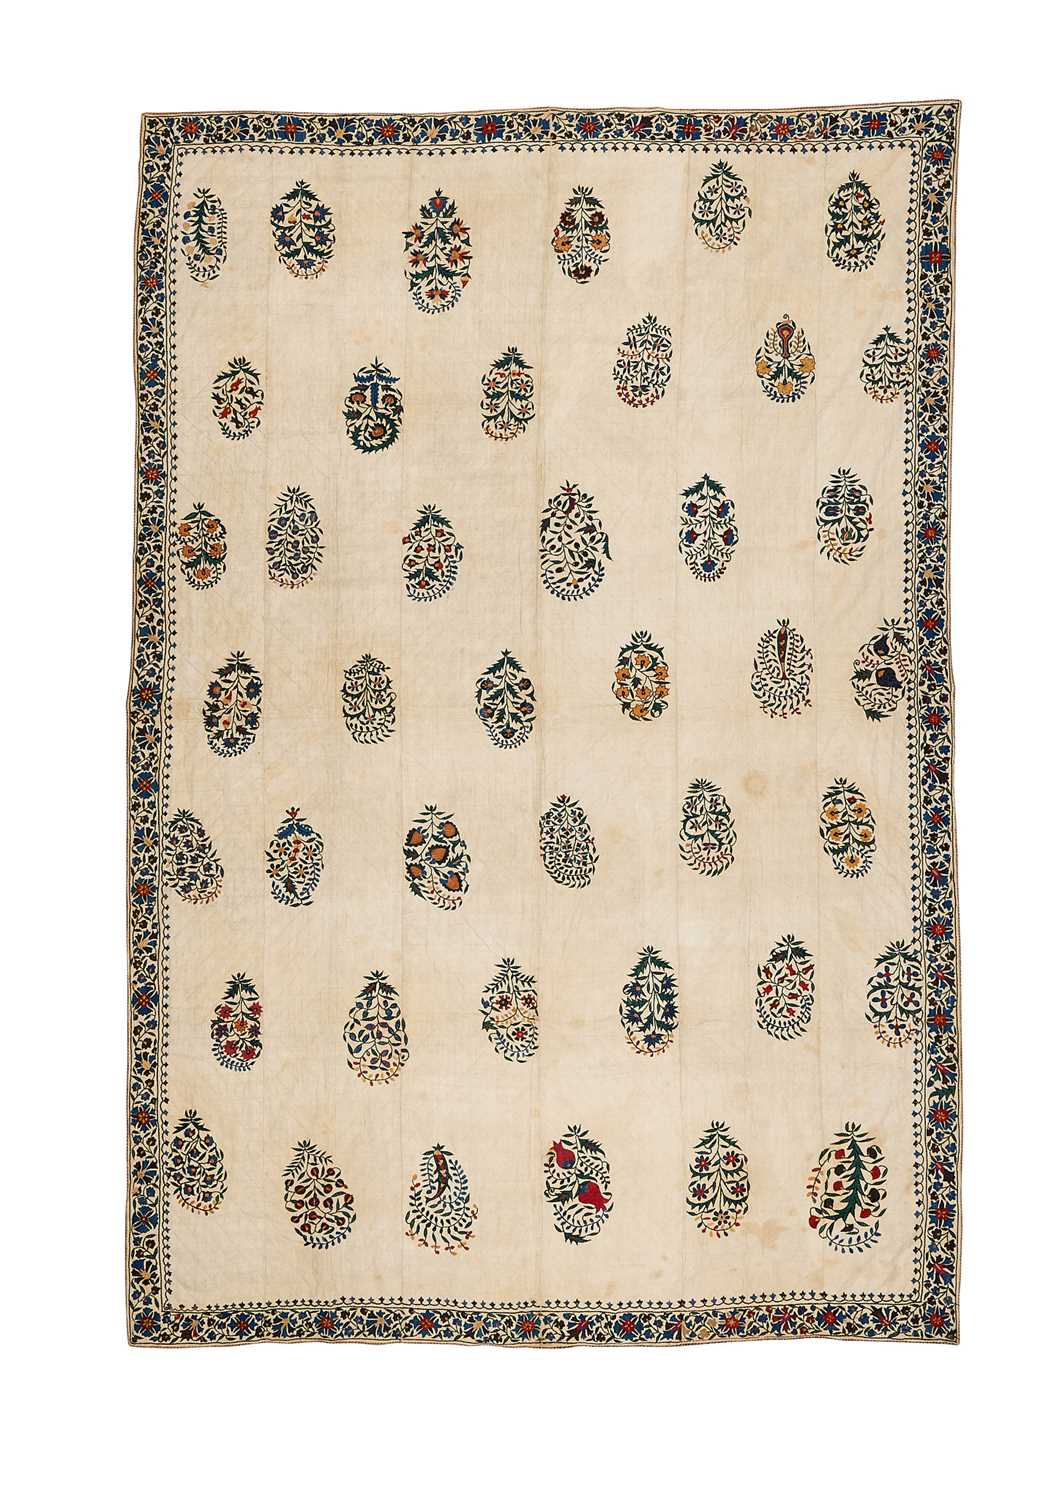 A MID 20TH CENTURY SUZANI BED SPREAD / WALL HANGING